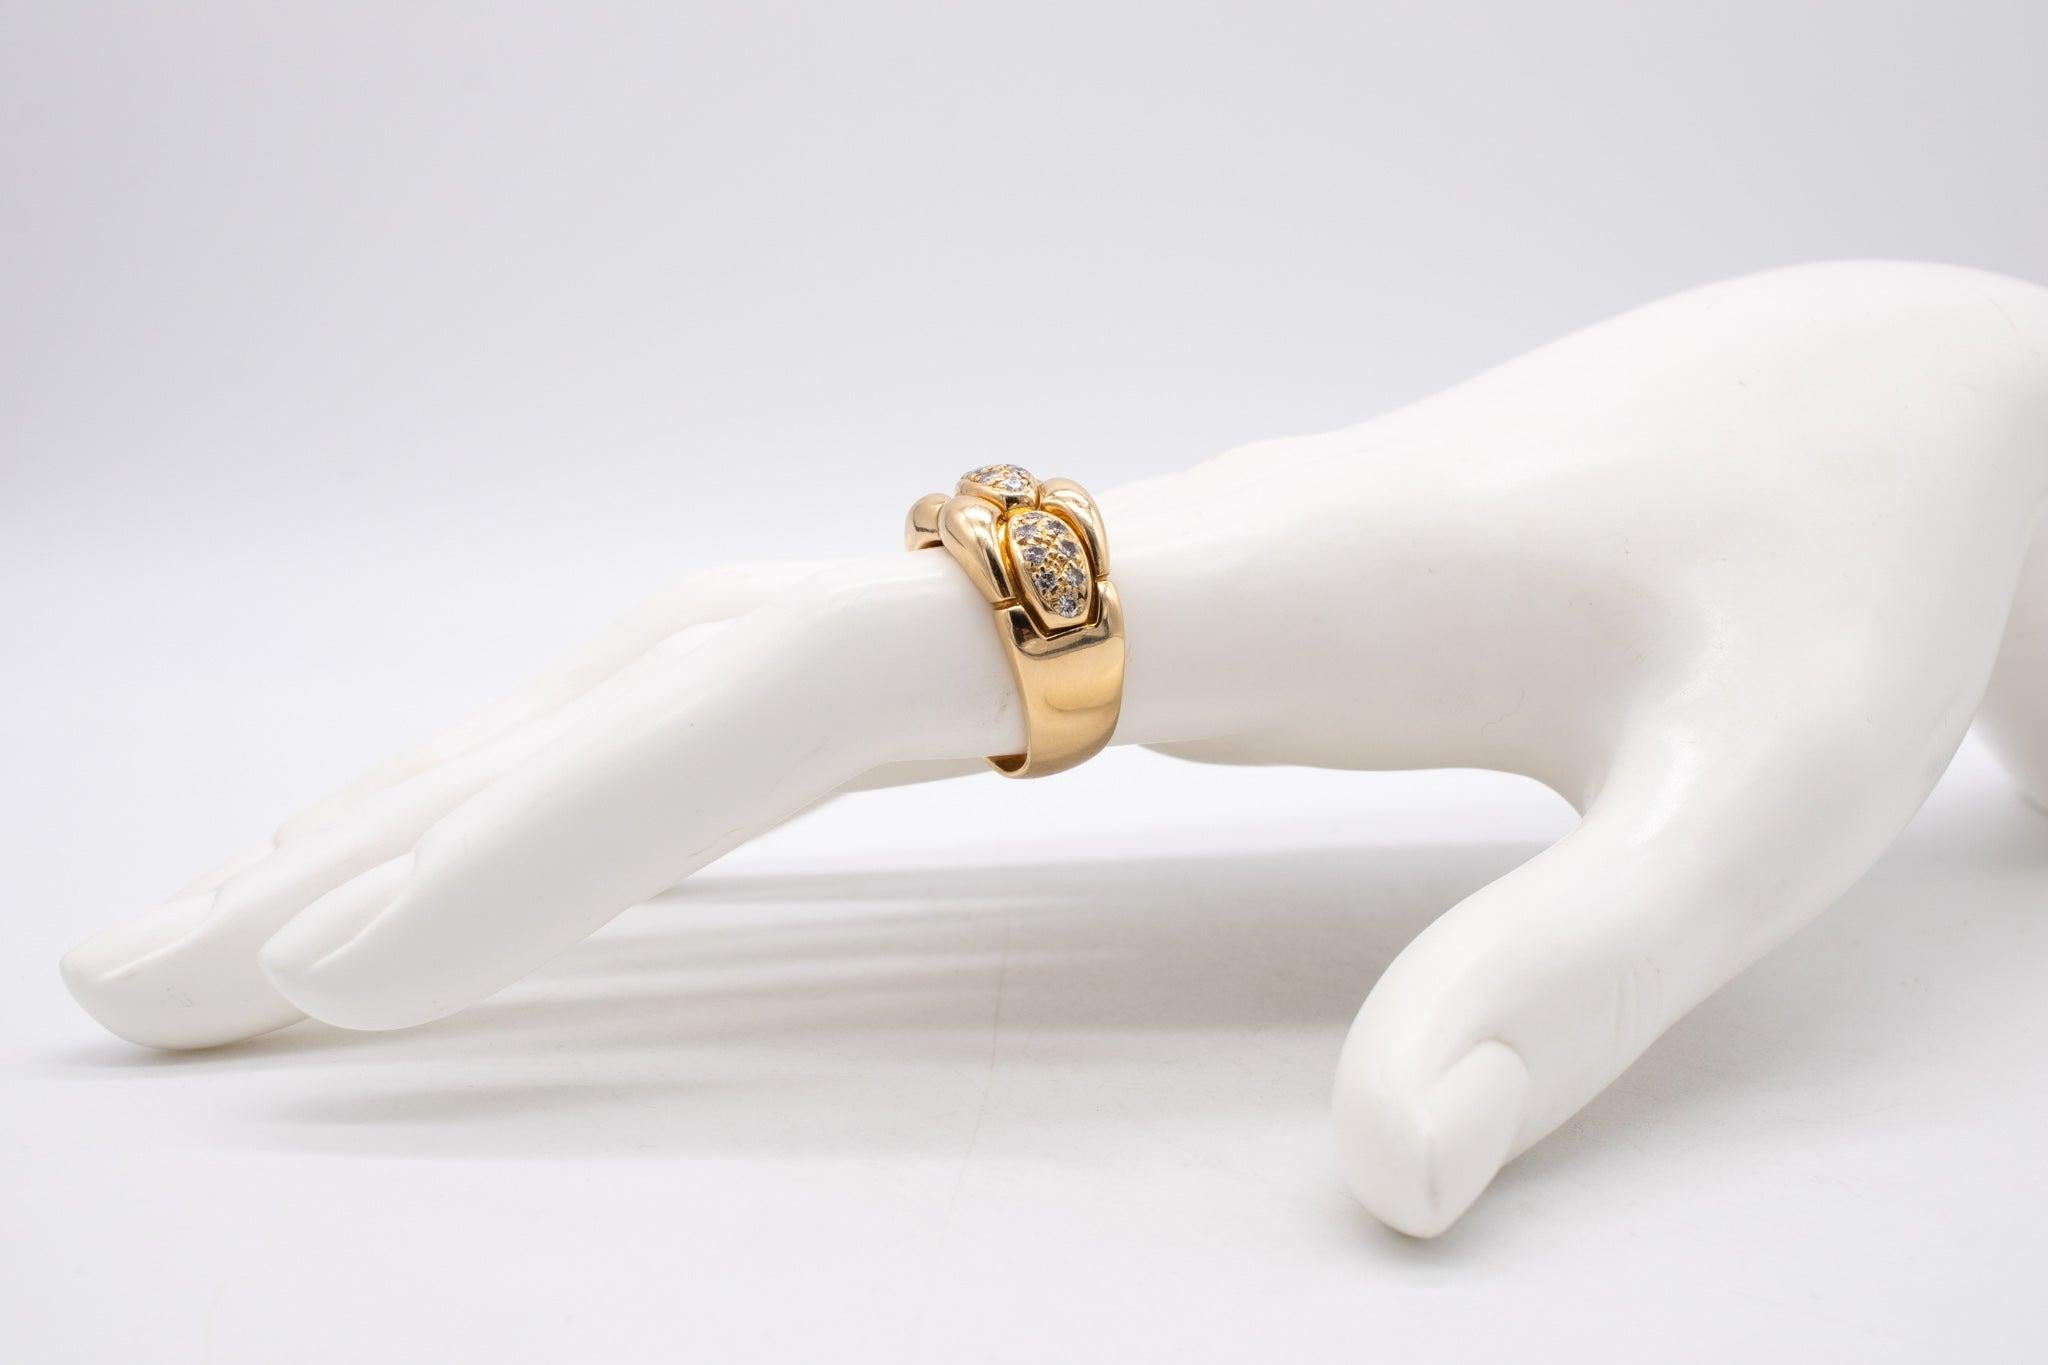 Contemporary Cartier Paris Cocktail Ring in 18Kt Yellow Gold with 0.50 Cts in VS Diamonds